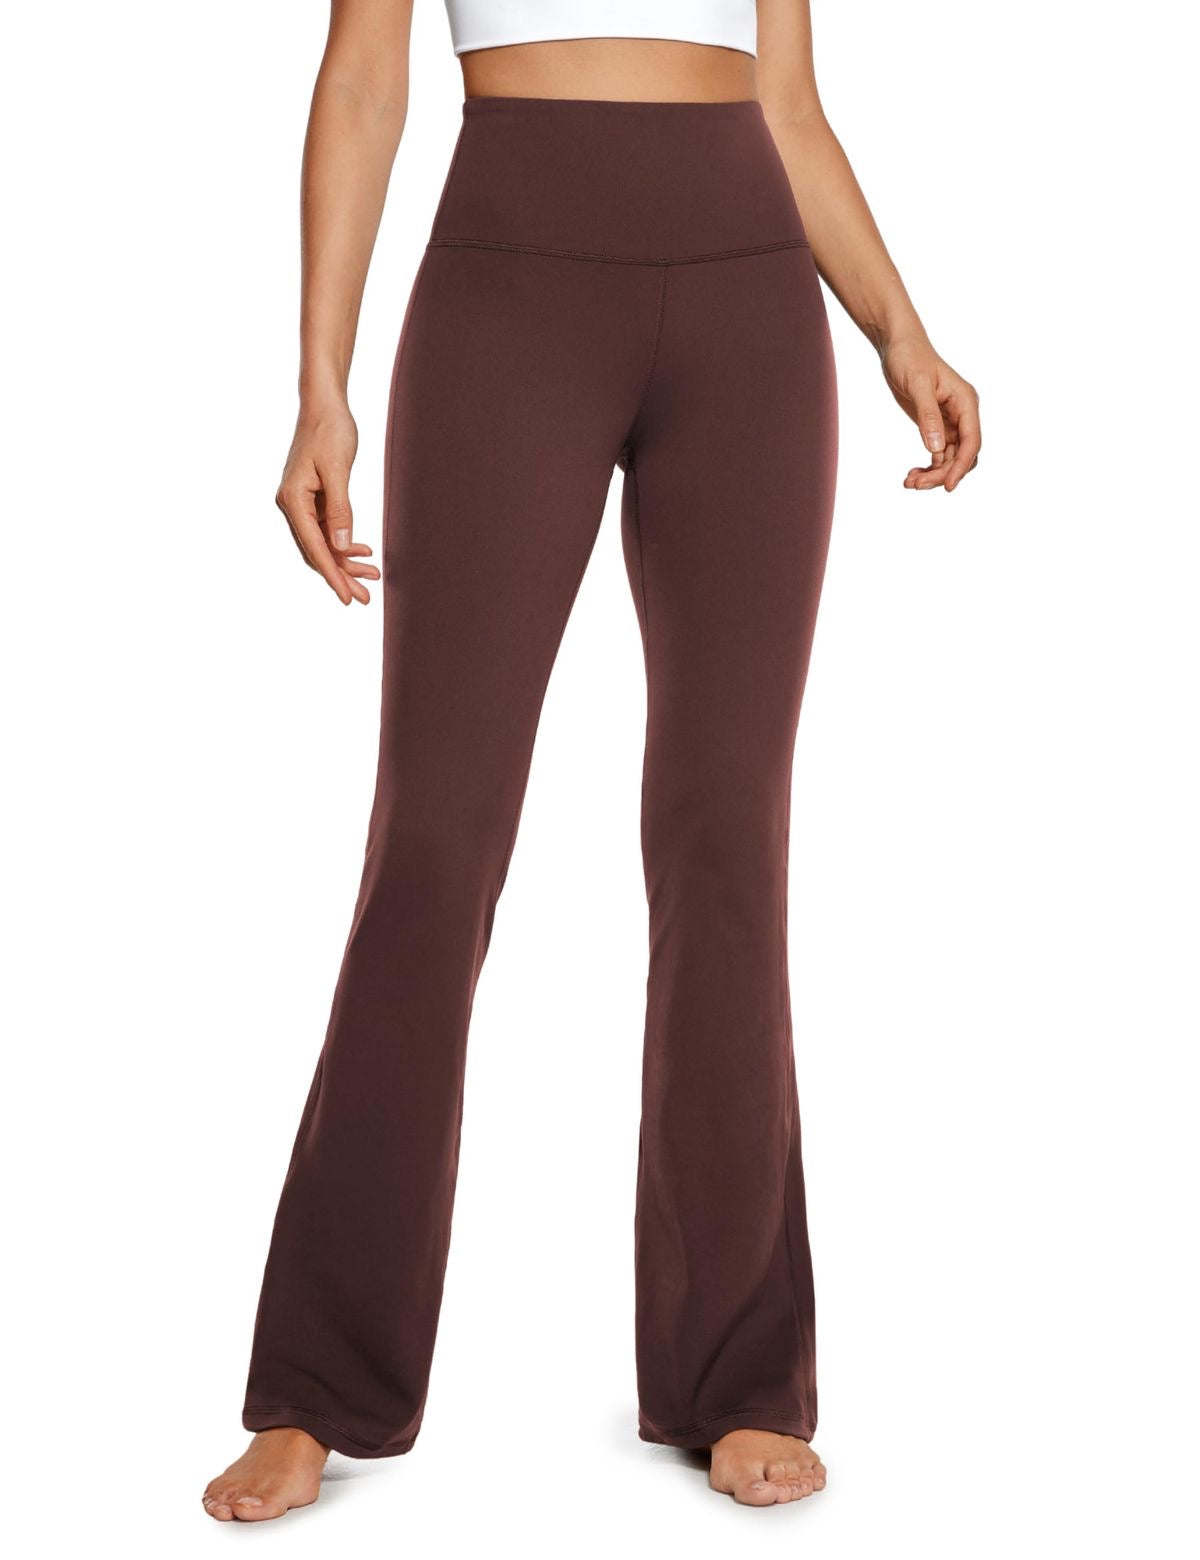 Best Brown Flare Leggings With FREE Shipping | shop-leggings.com